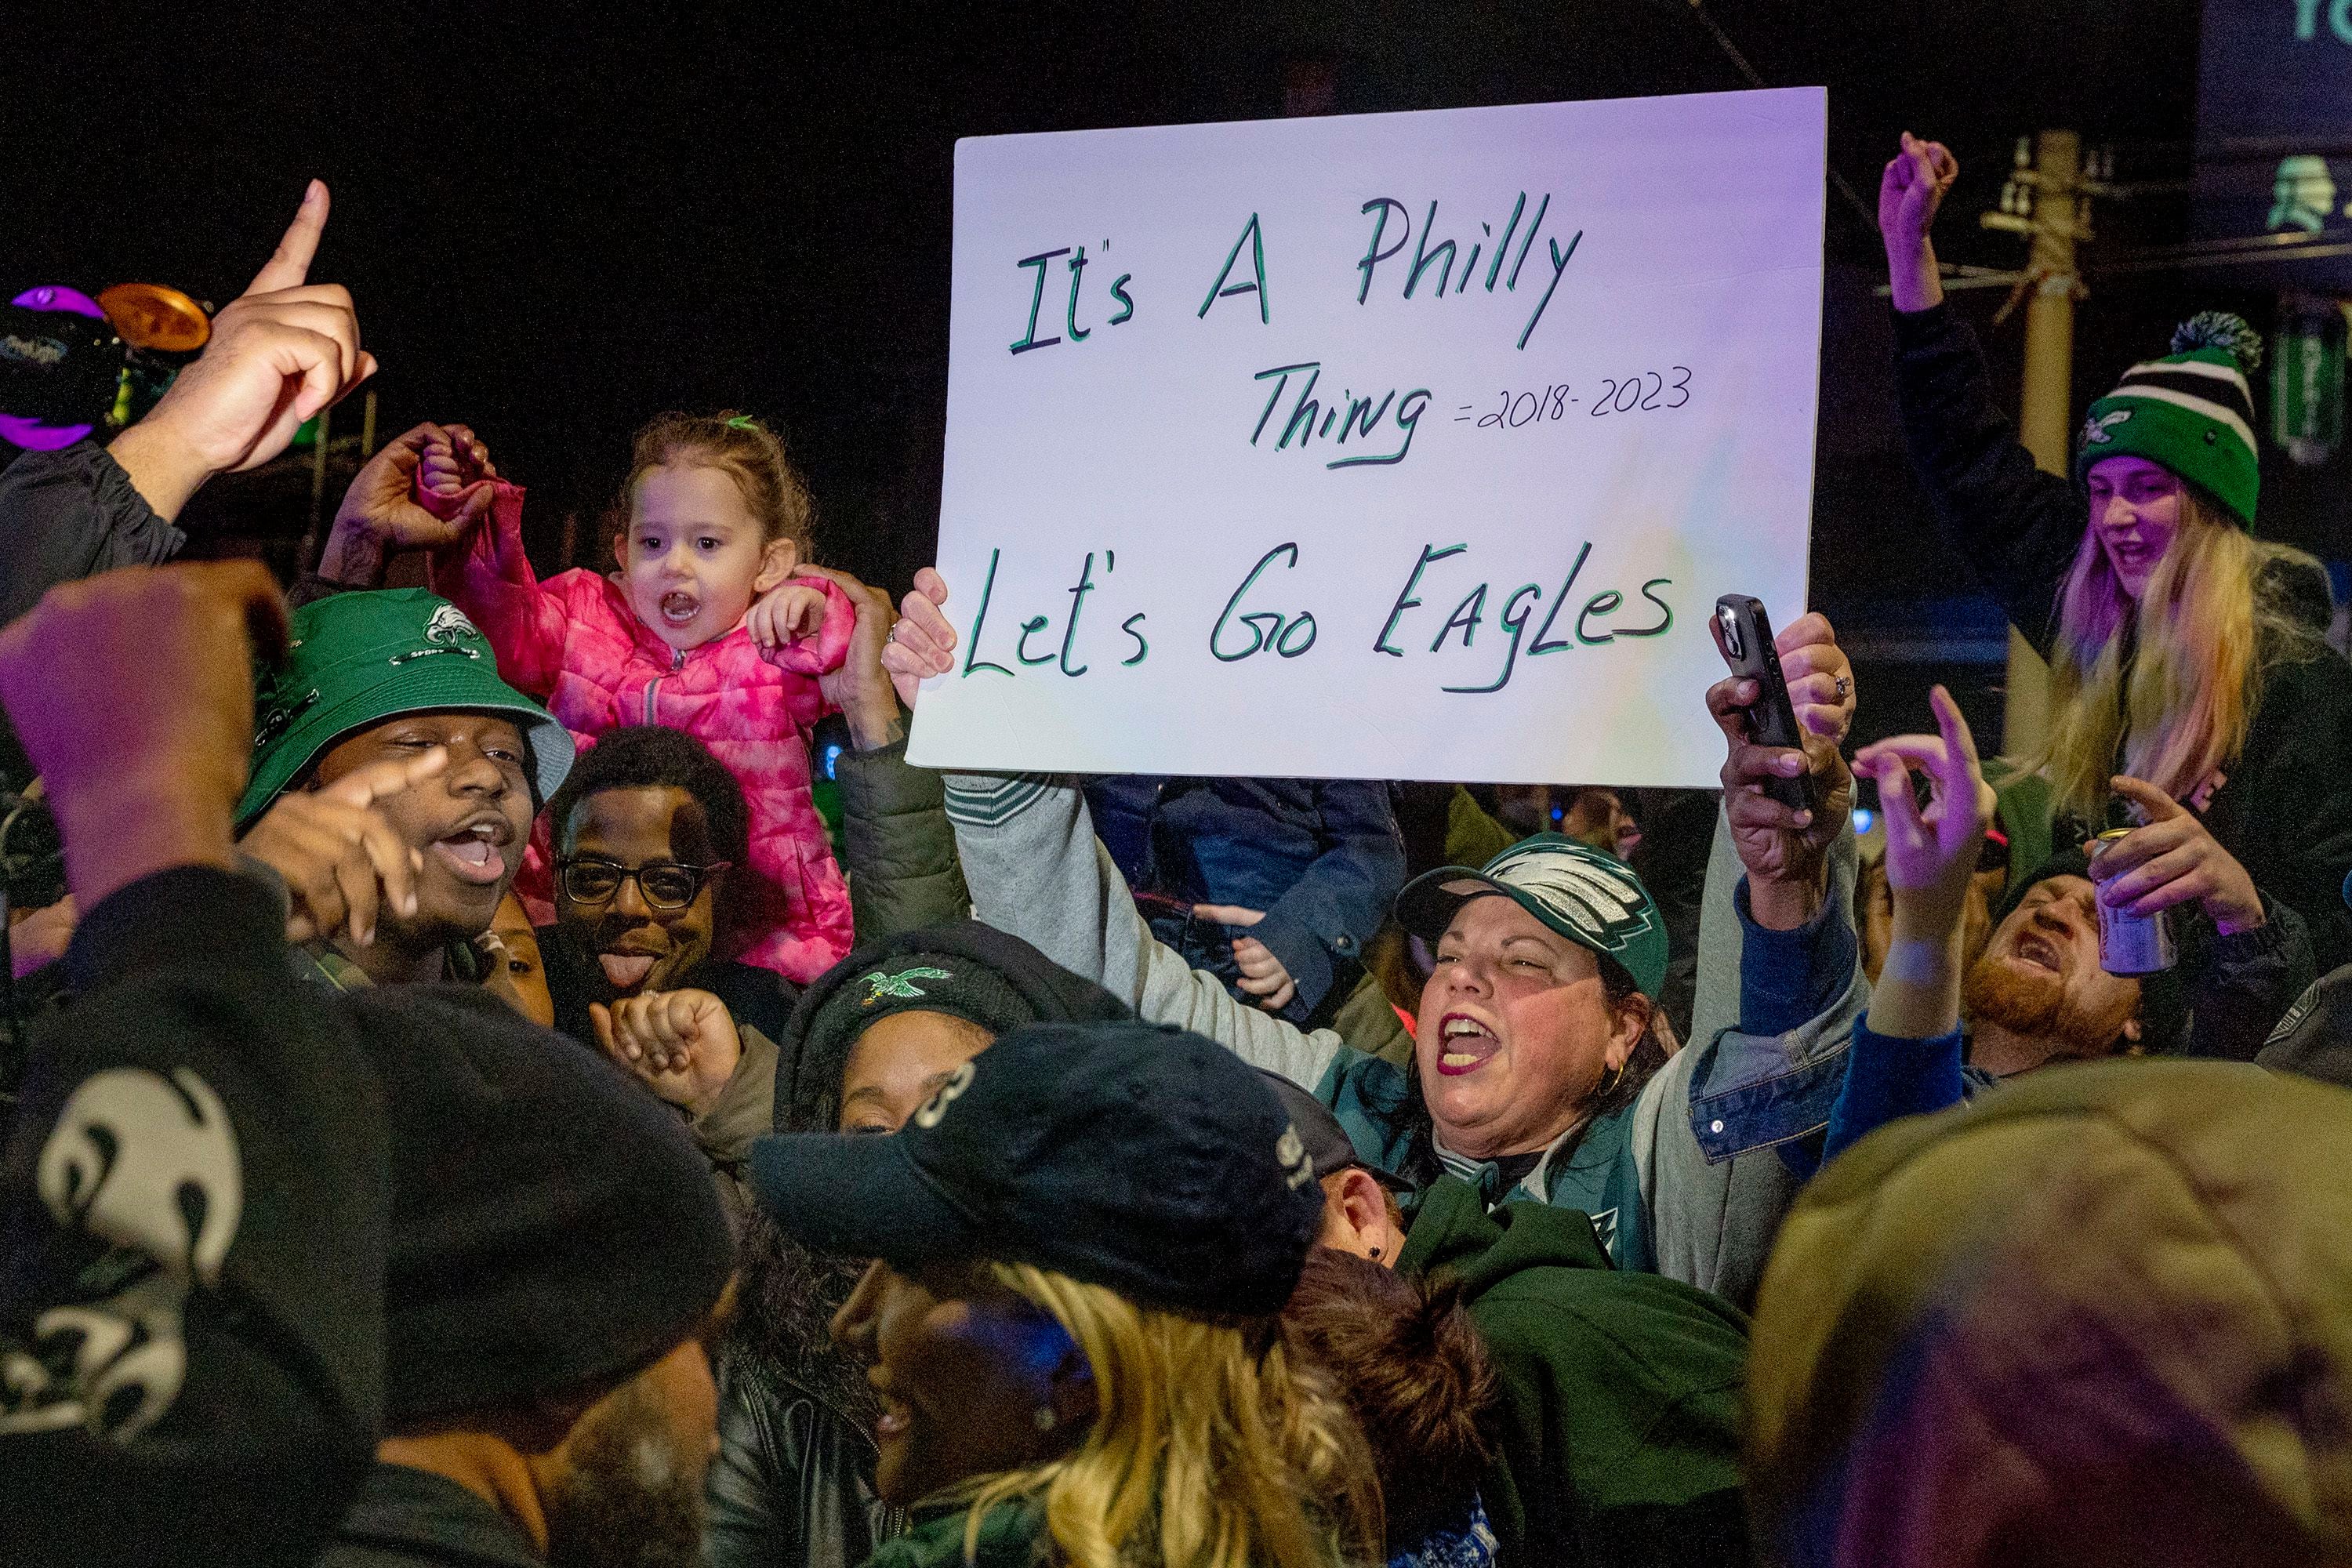 Super Bowl 2023: It's a Philly thing is the Eagles' slogan, but